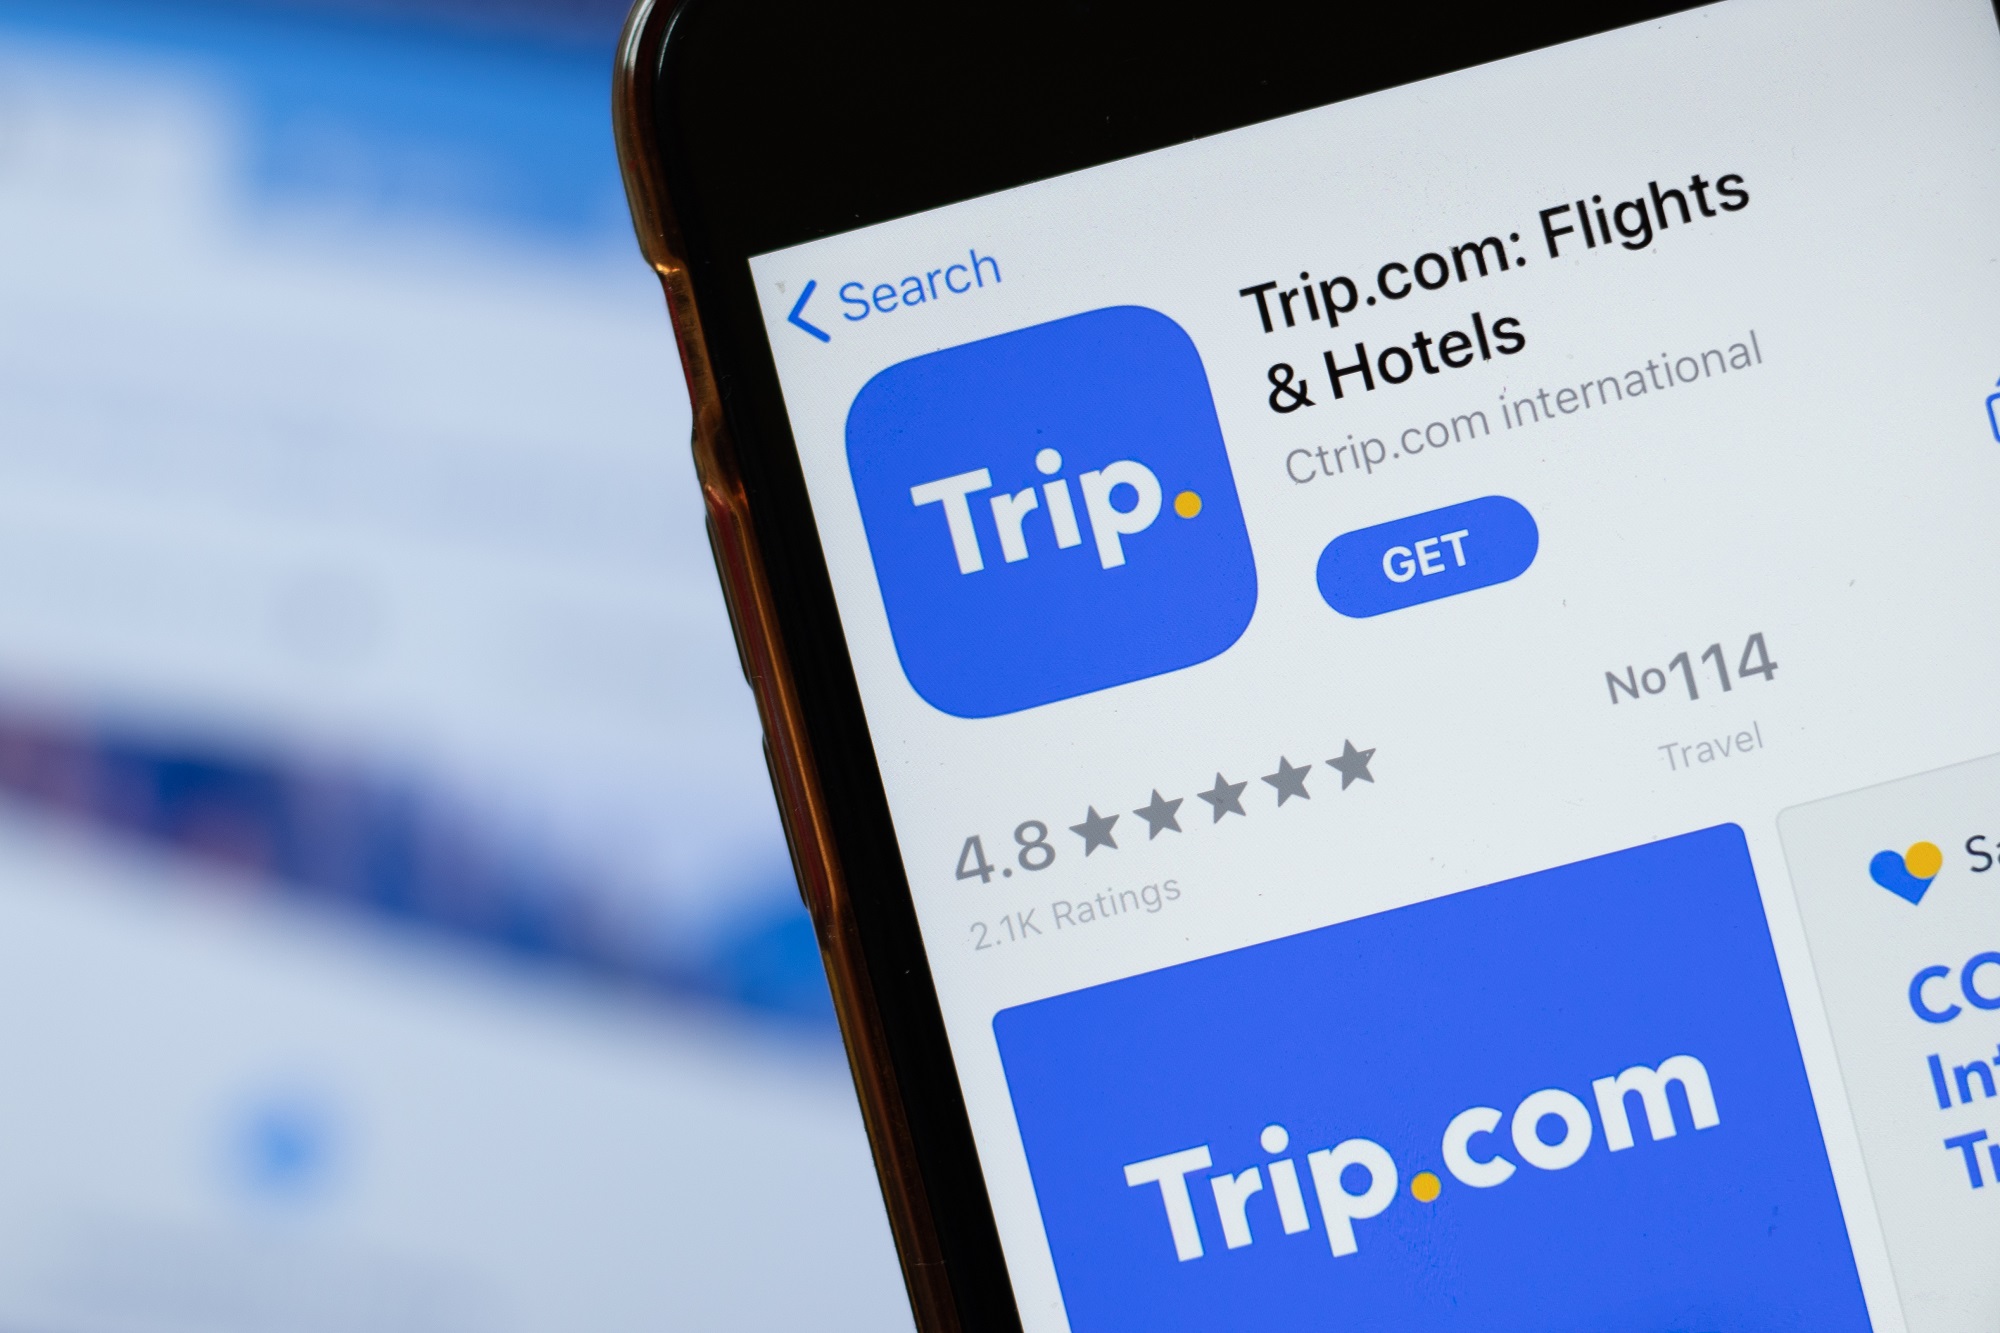 Trip.com Group sees strong recovery momentum in international travel